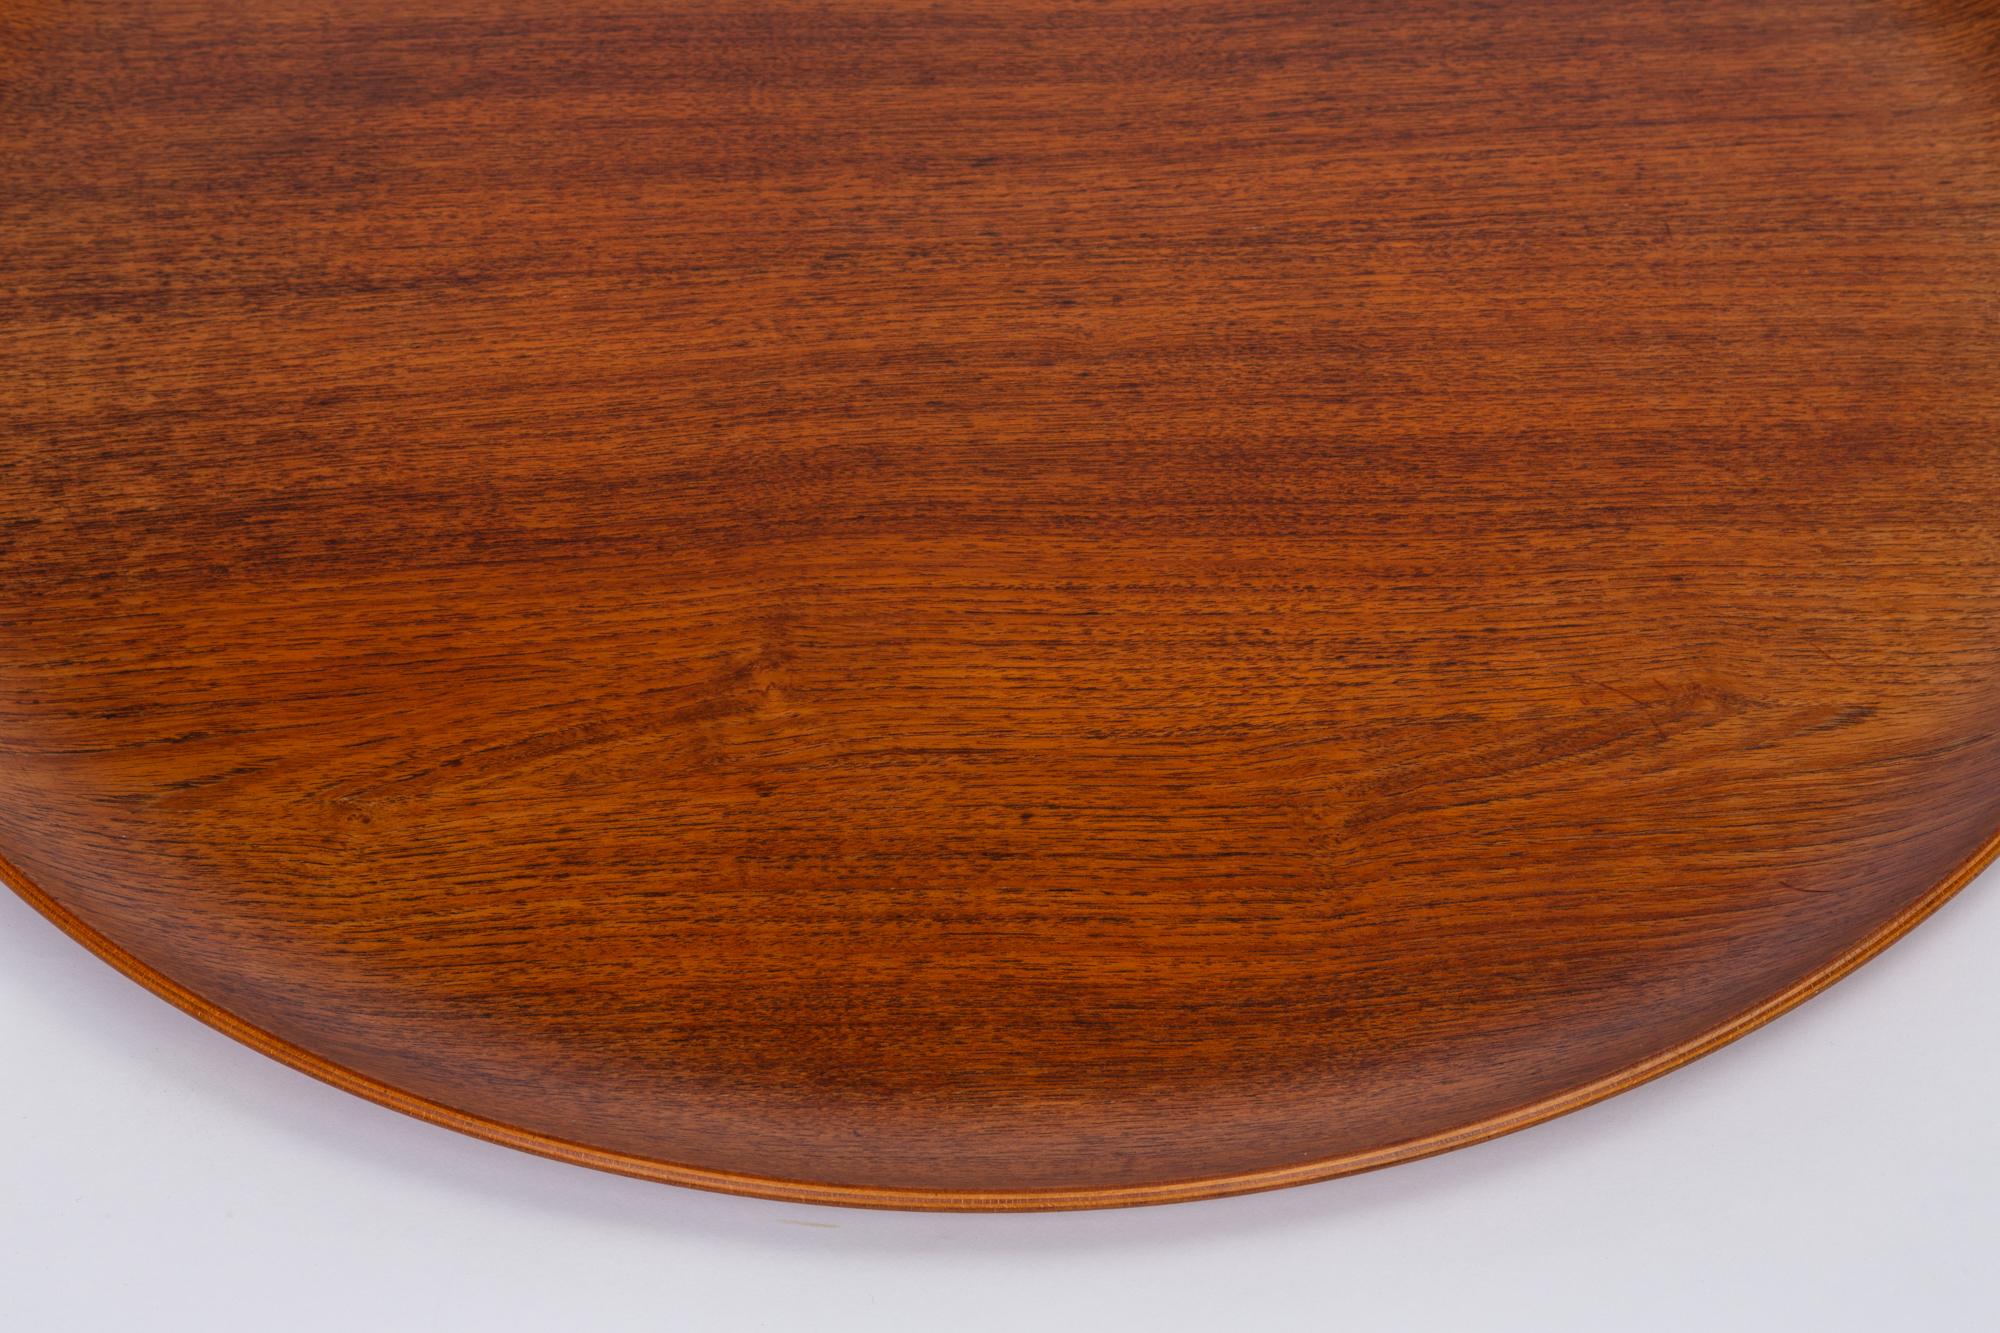 Jens Quistgaard Style Teak Tray with Curved Edge 3